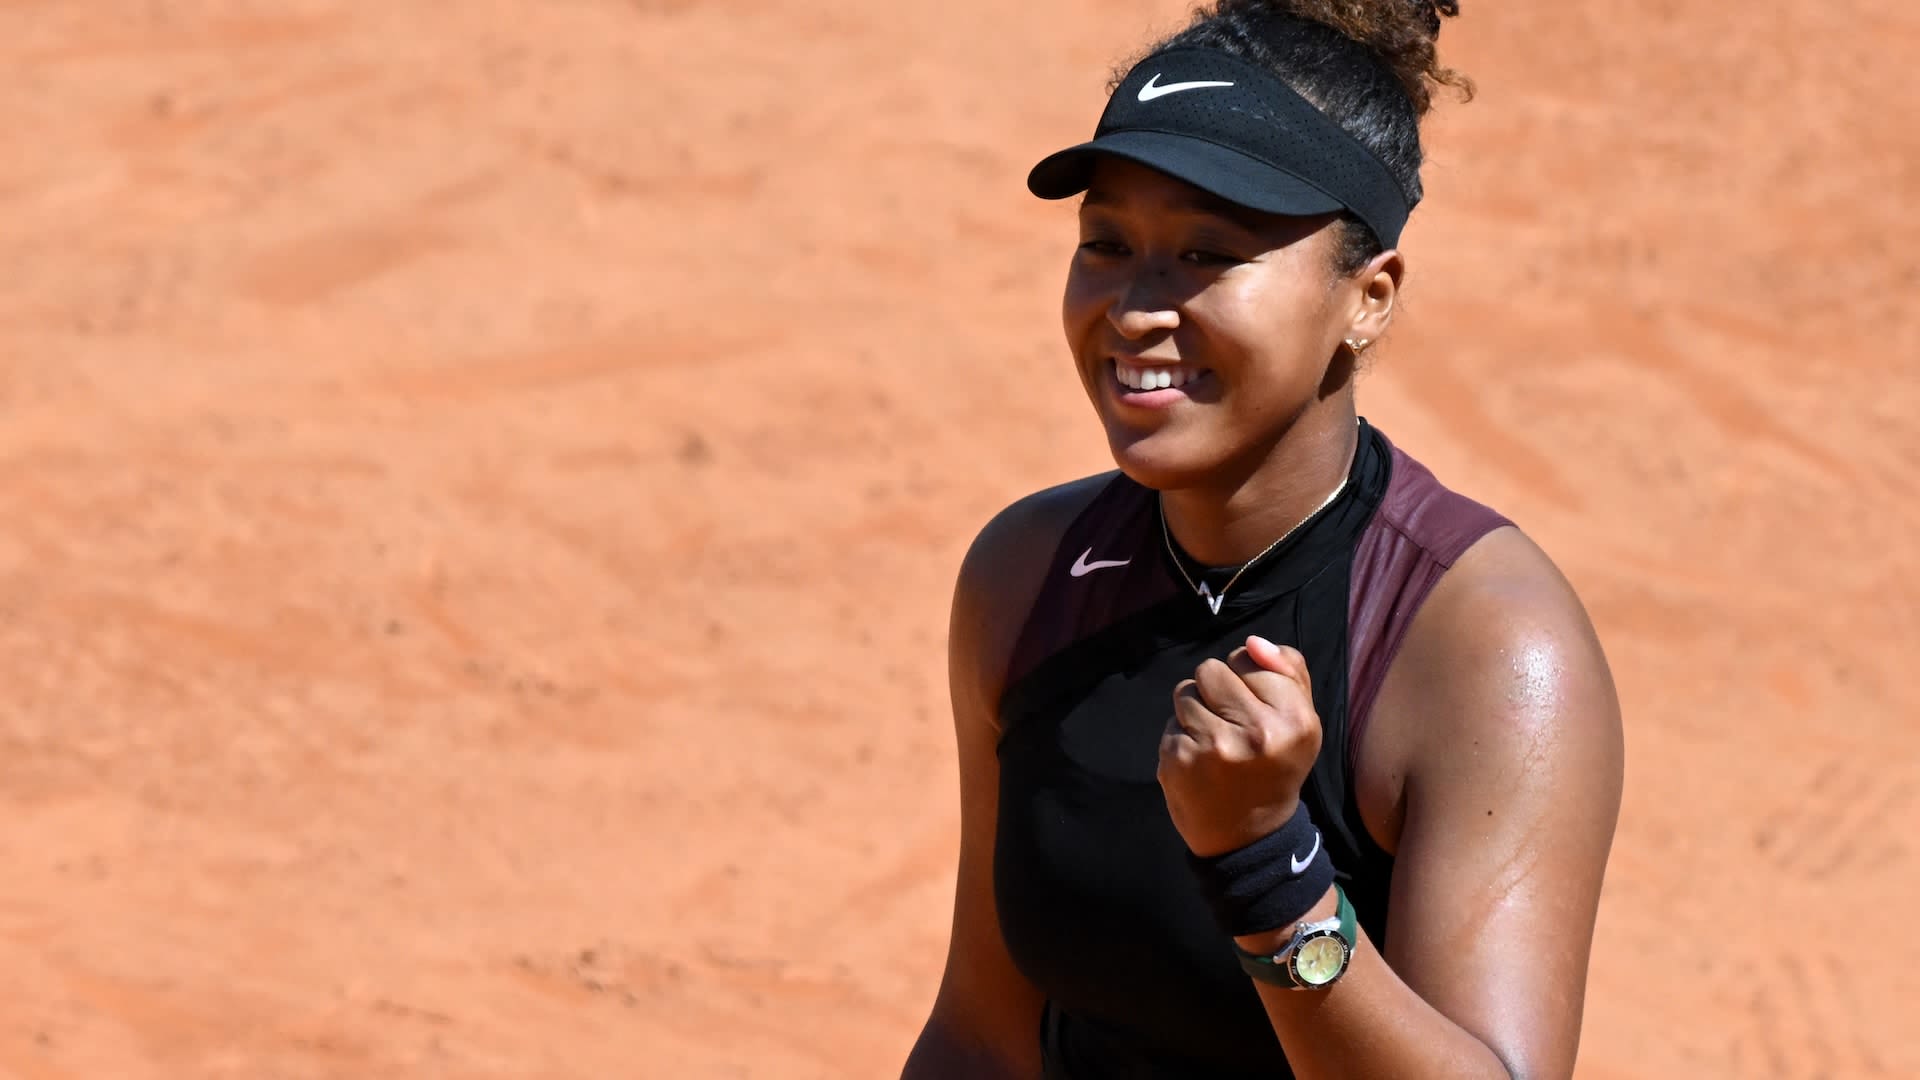 Call me “Clayomi”? Inspired by Nadal, Naomi Osaka scores second Top 20 win in Rome over Daria Kasatkina | Tennis.com